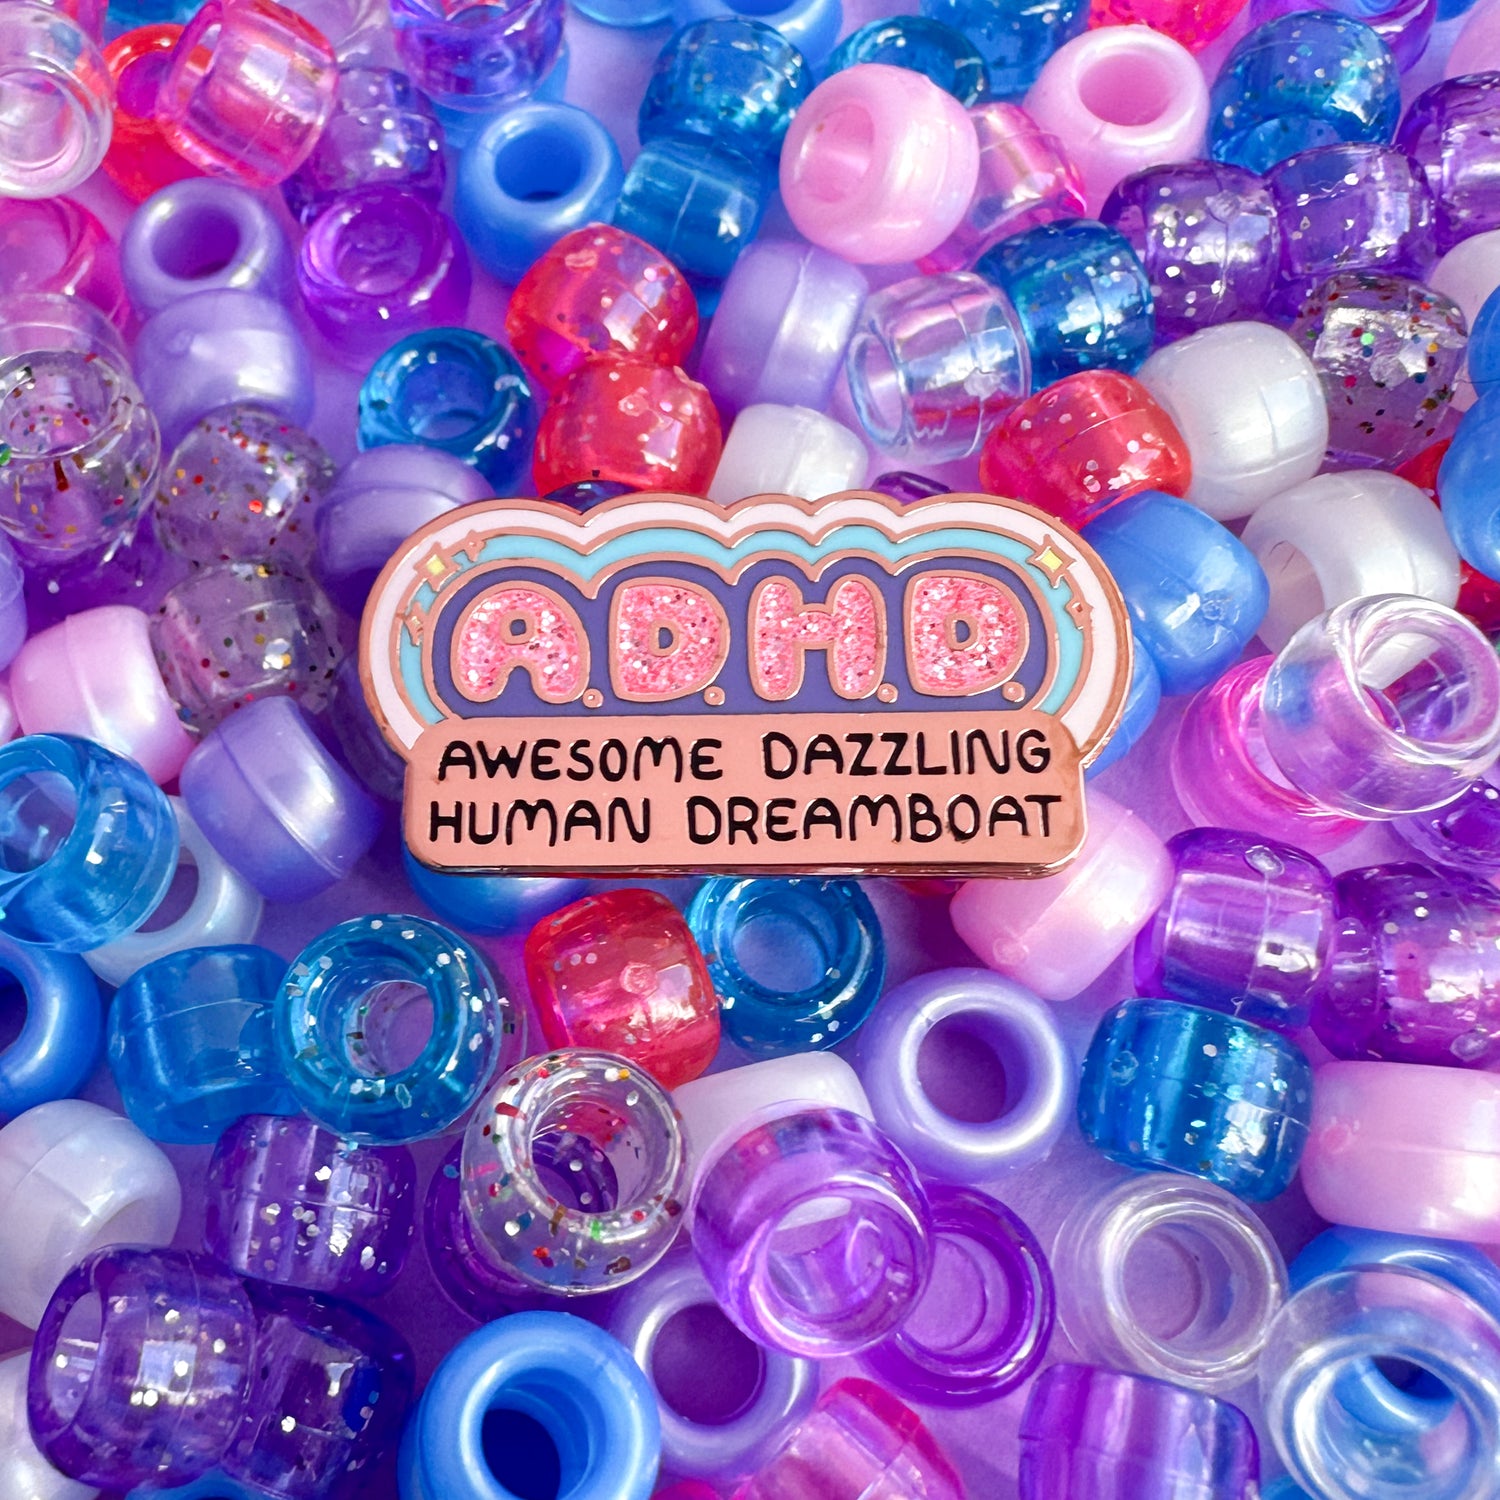 An enamel pin that reads A.D.H.D. Awesome Dazzling Human Dreamboat sitting on top of a pile of glitter pony beads in purple, blue, and pink, which are the same colors of the pin. 